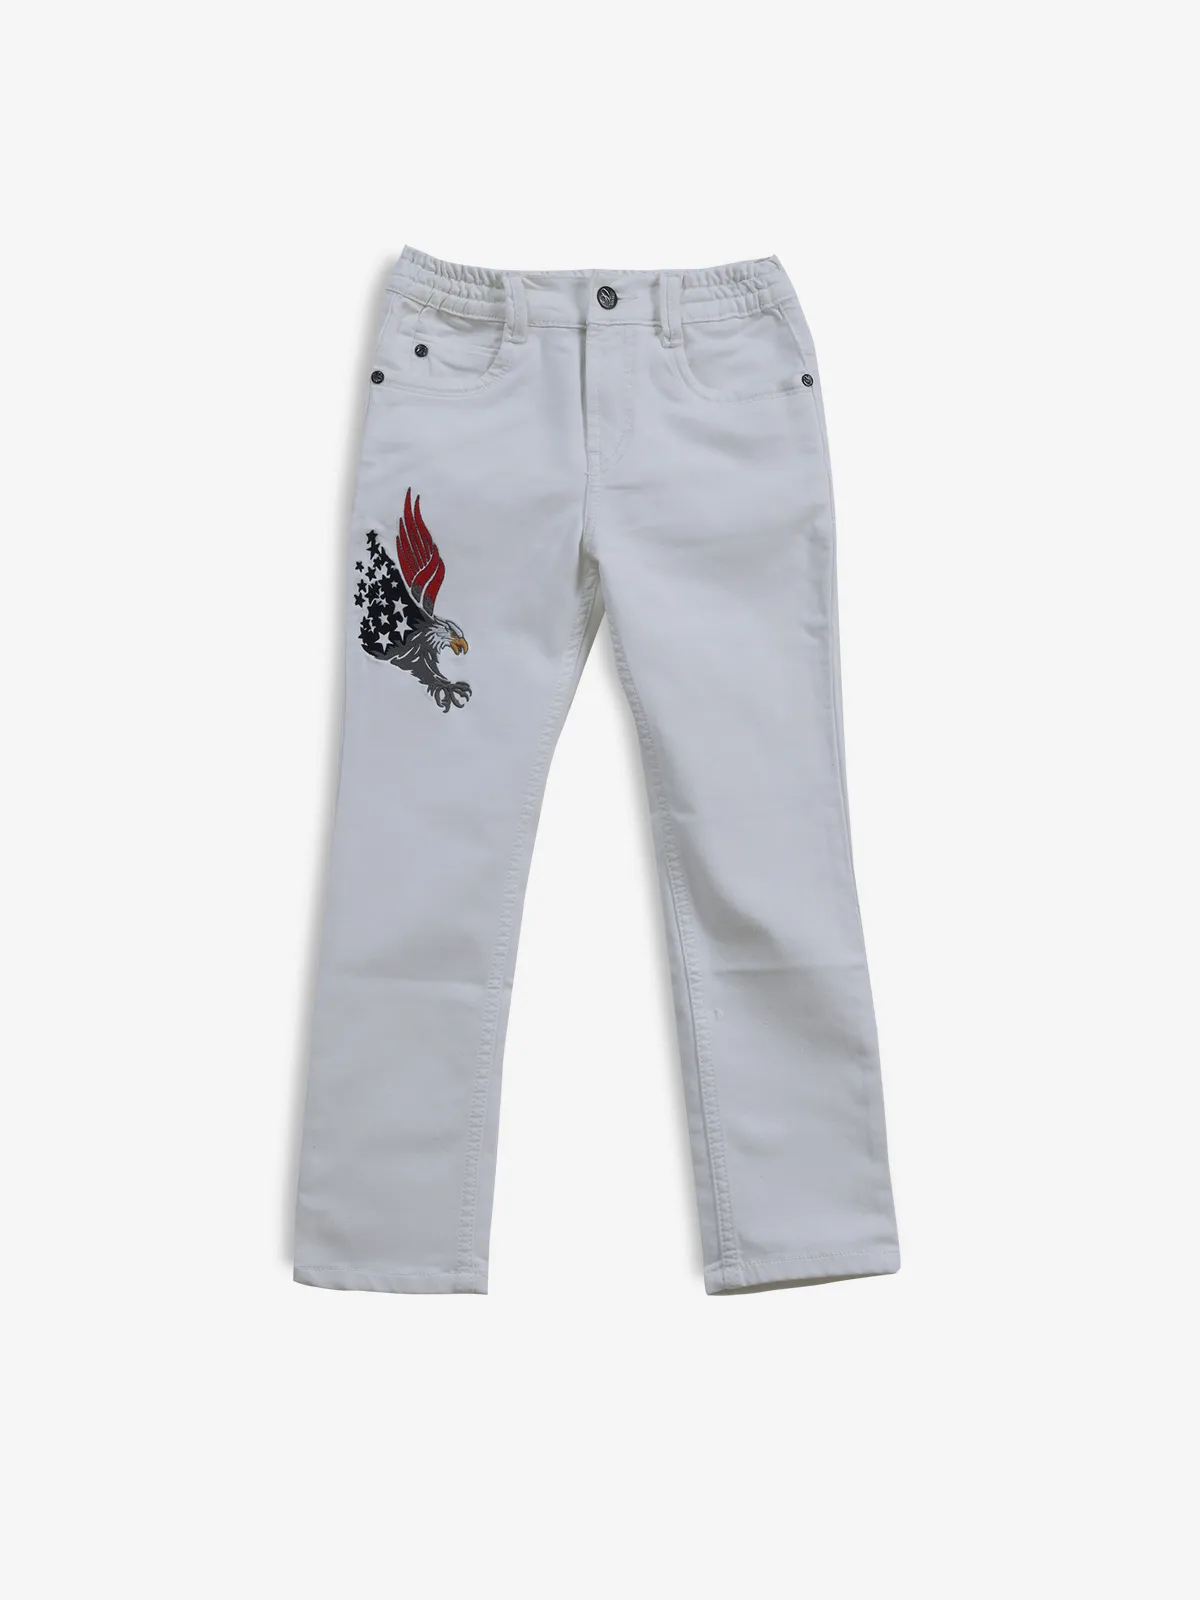 BAD BOYS white solid boys jeans